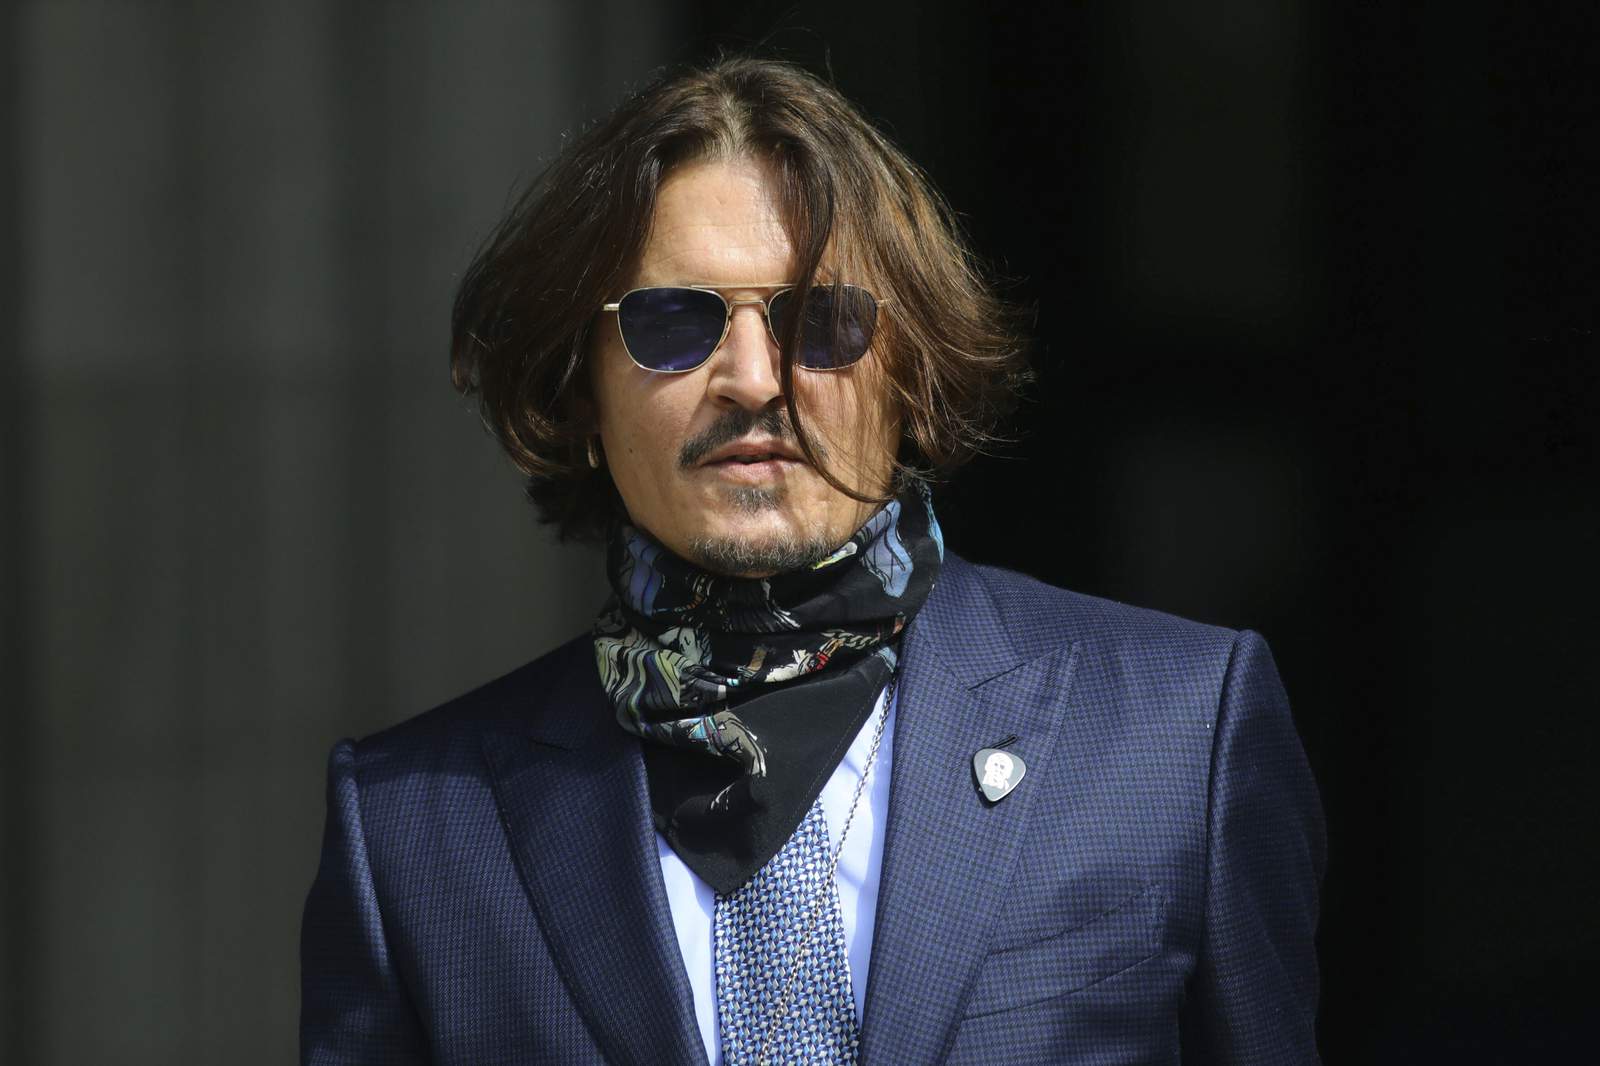 Lawyers summing up at Depp's libel trial against UK tabloid